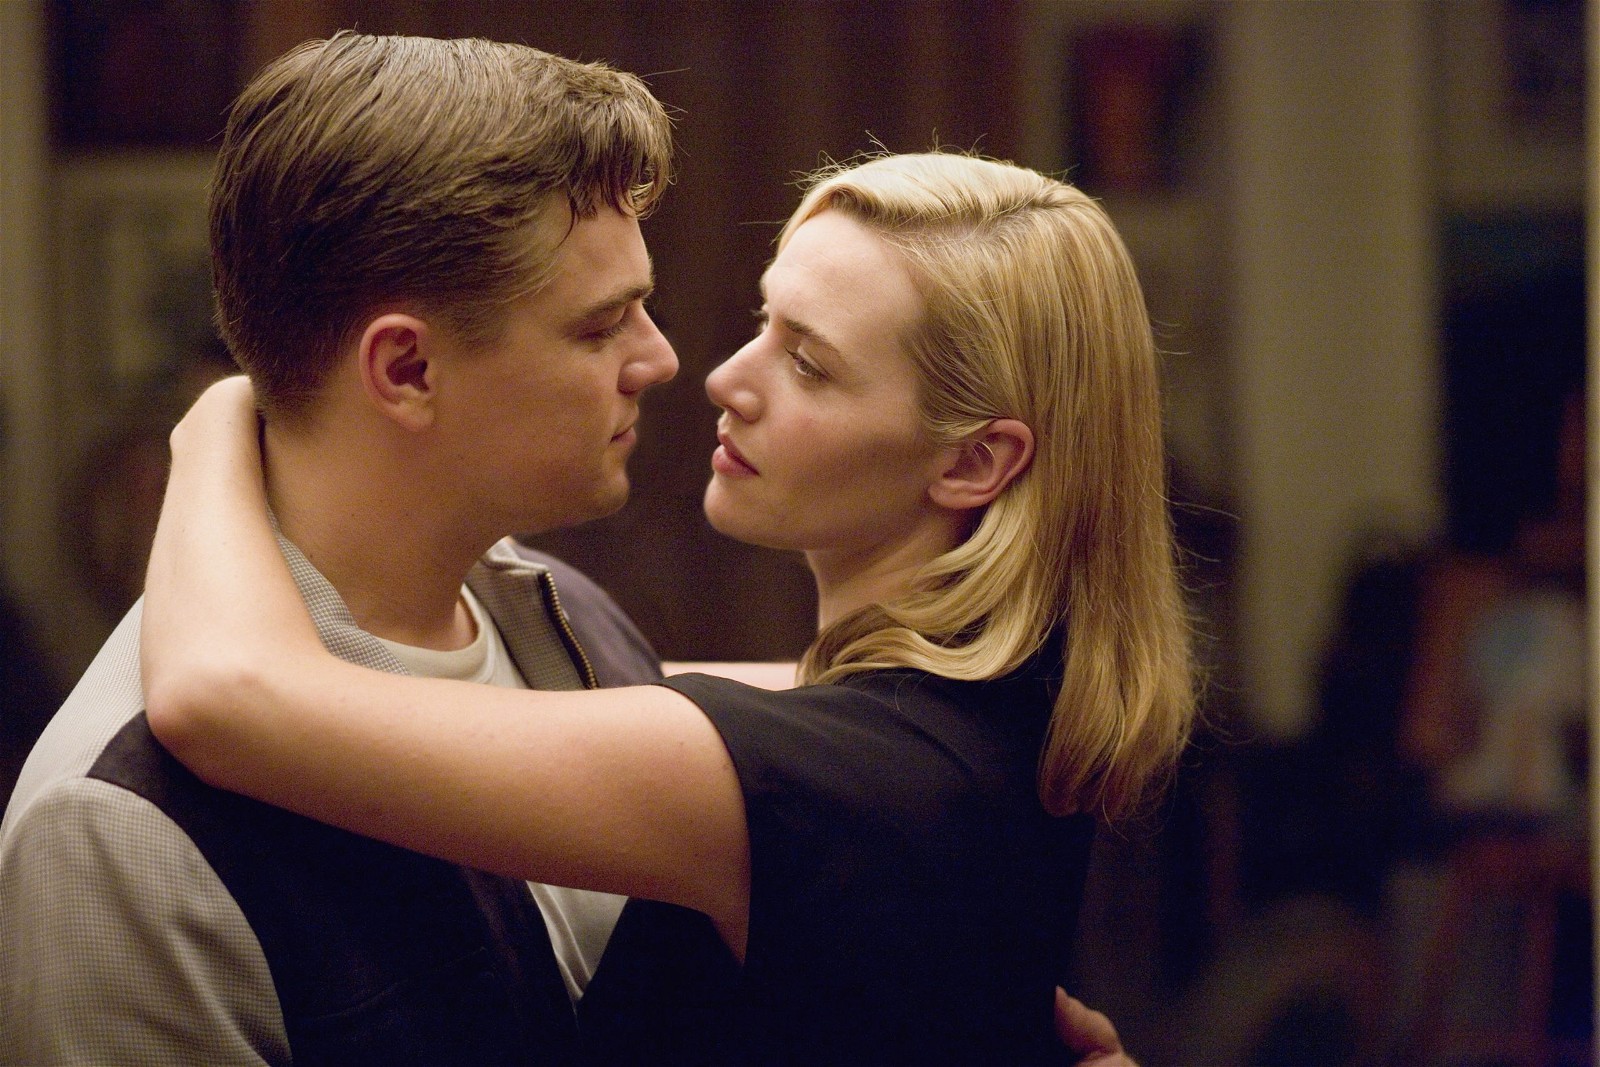 Leonardo DiCaprio and Kate Winslet in a still from Revolutionary Road